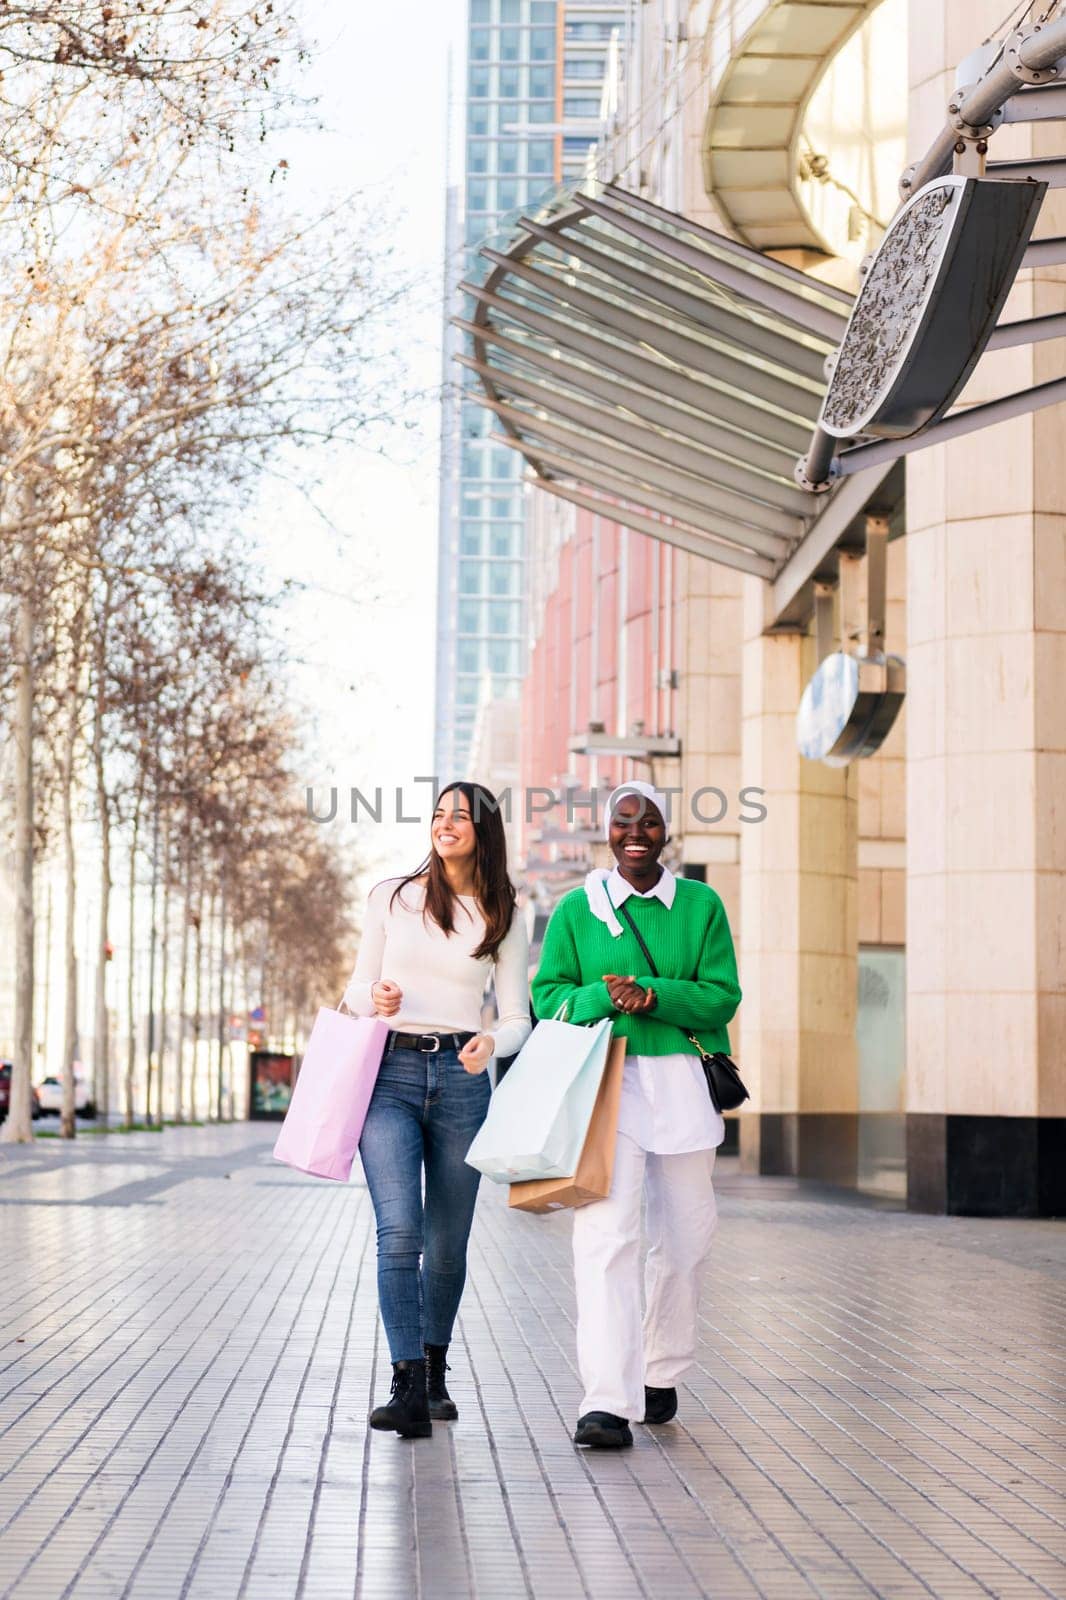 multiracial couple of female friends smiling happy walking in a shopping area, friendship and modern lifestyle concept, copy space for text